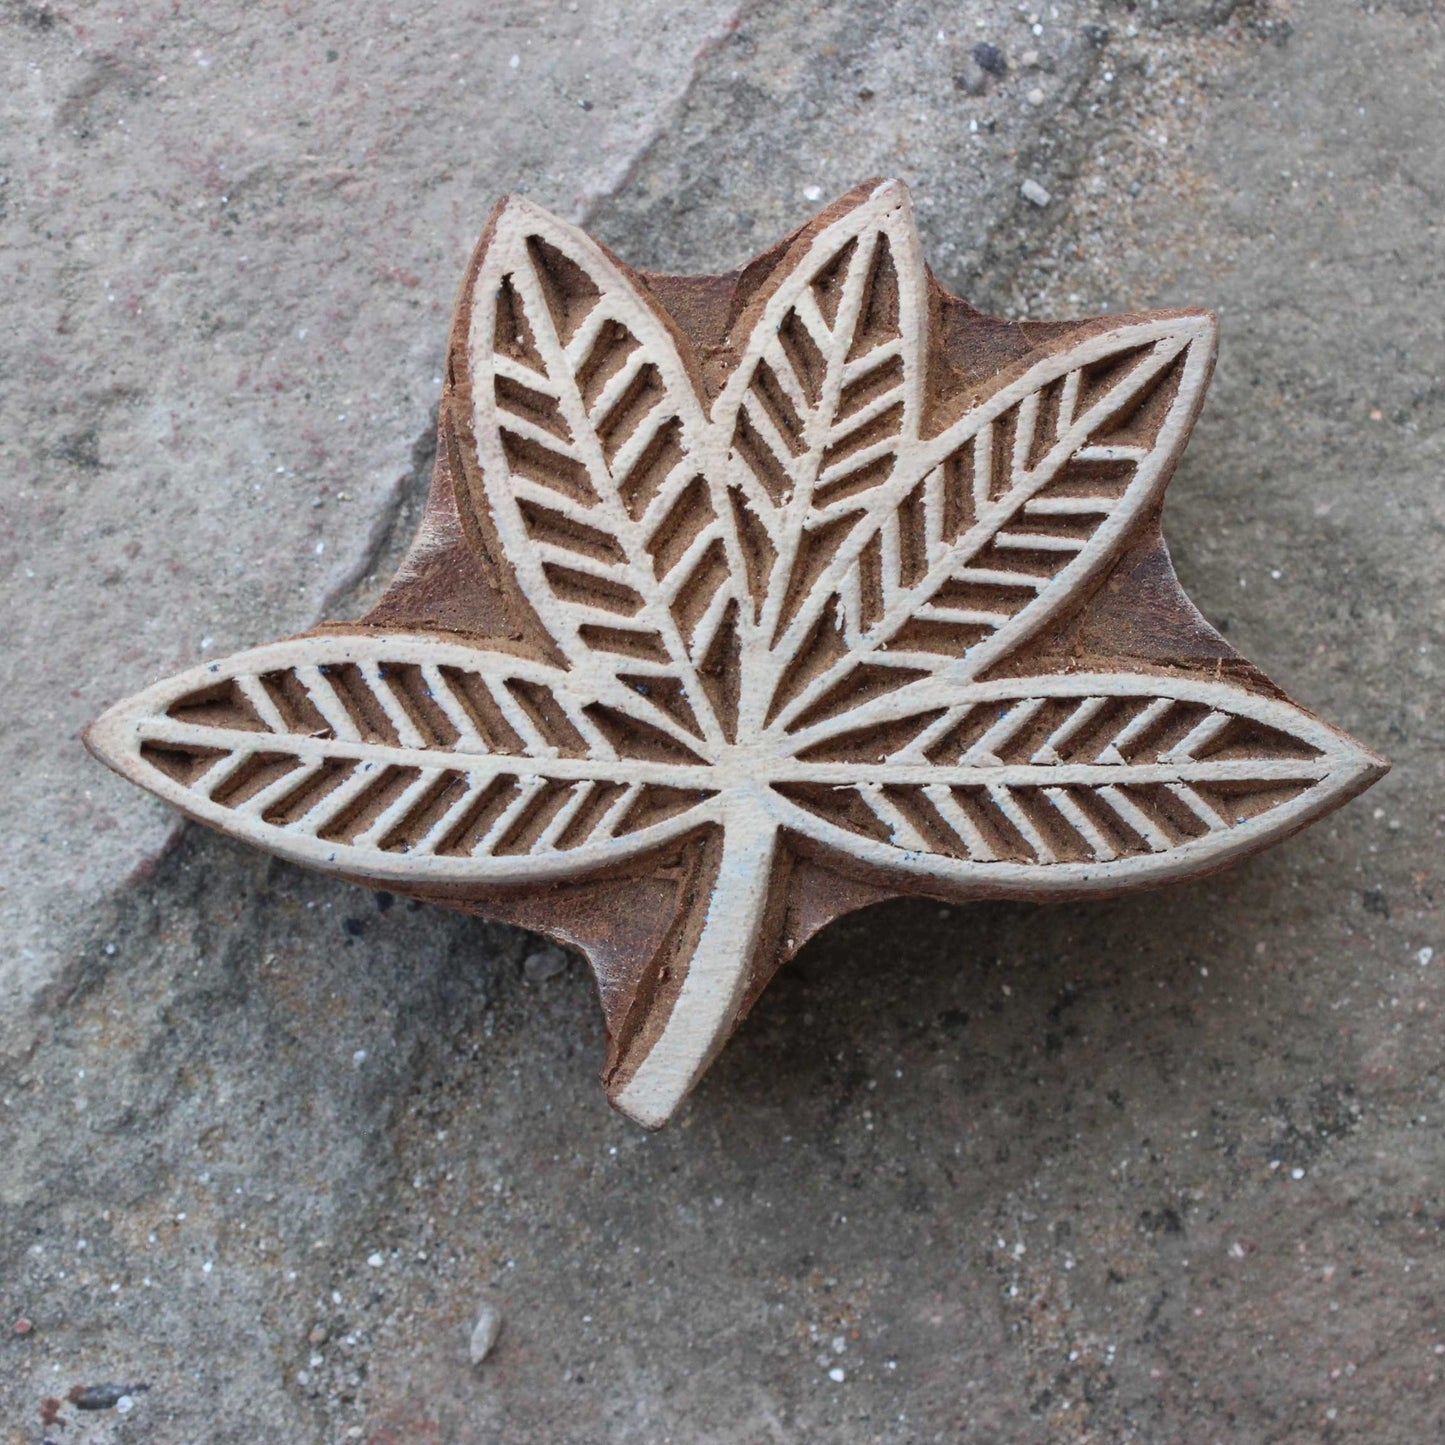 Leaves Block Print Stamp Hand Carved Wood Block Stamp Tree Fabric Stamp Hand Carved Textile Block For Printing Branch Soap Making Stamp